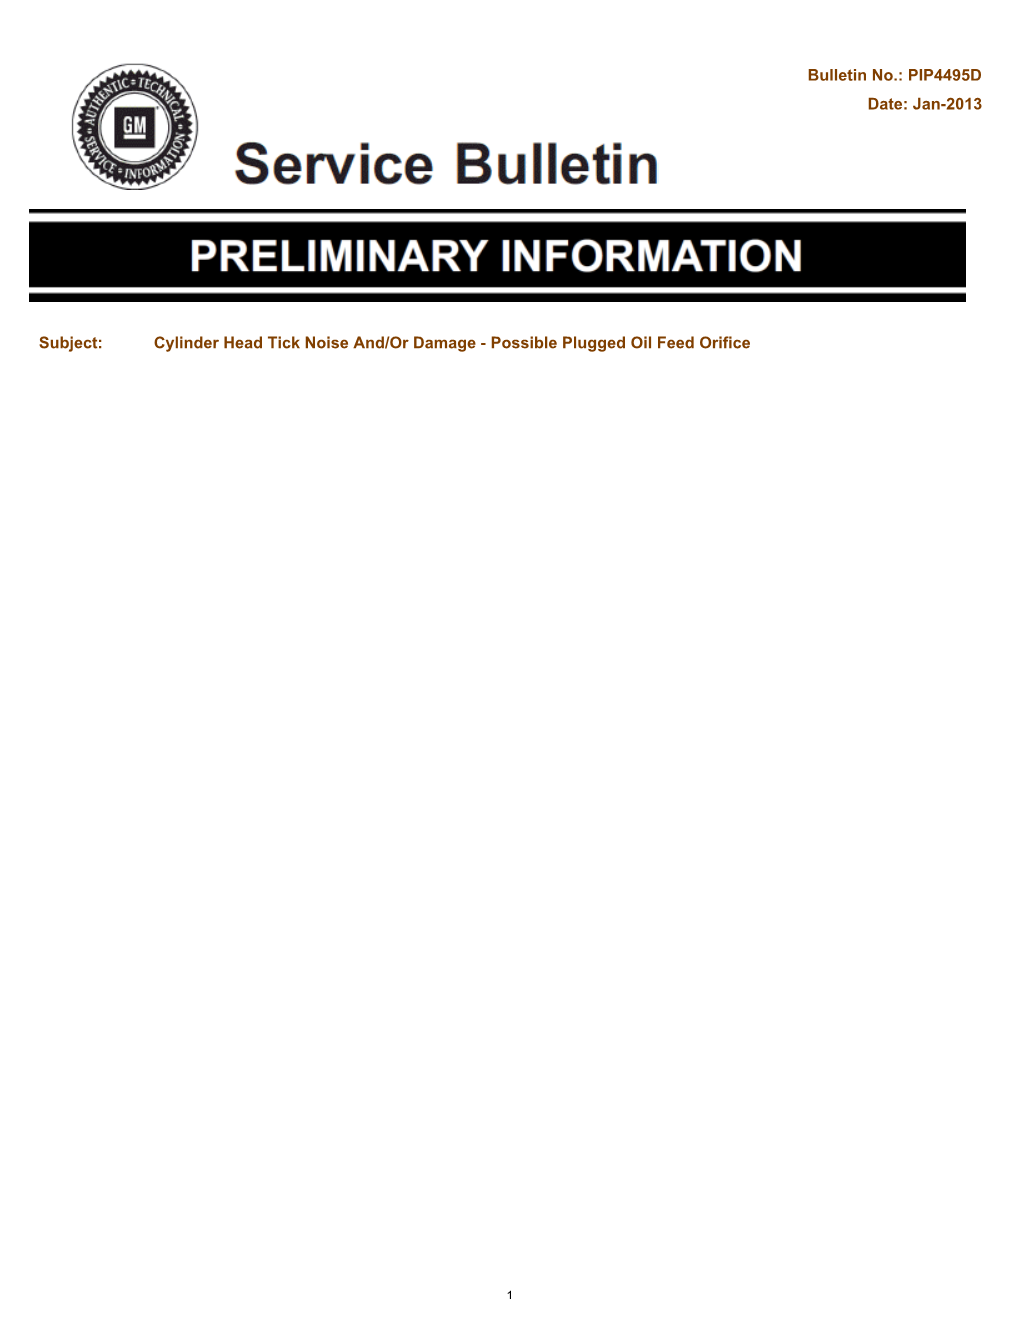 Bulletin No.: PIP4495D Date: Jan-2013 Subject: Cylinder Head Tick Noise And/Or Damage